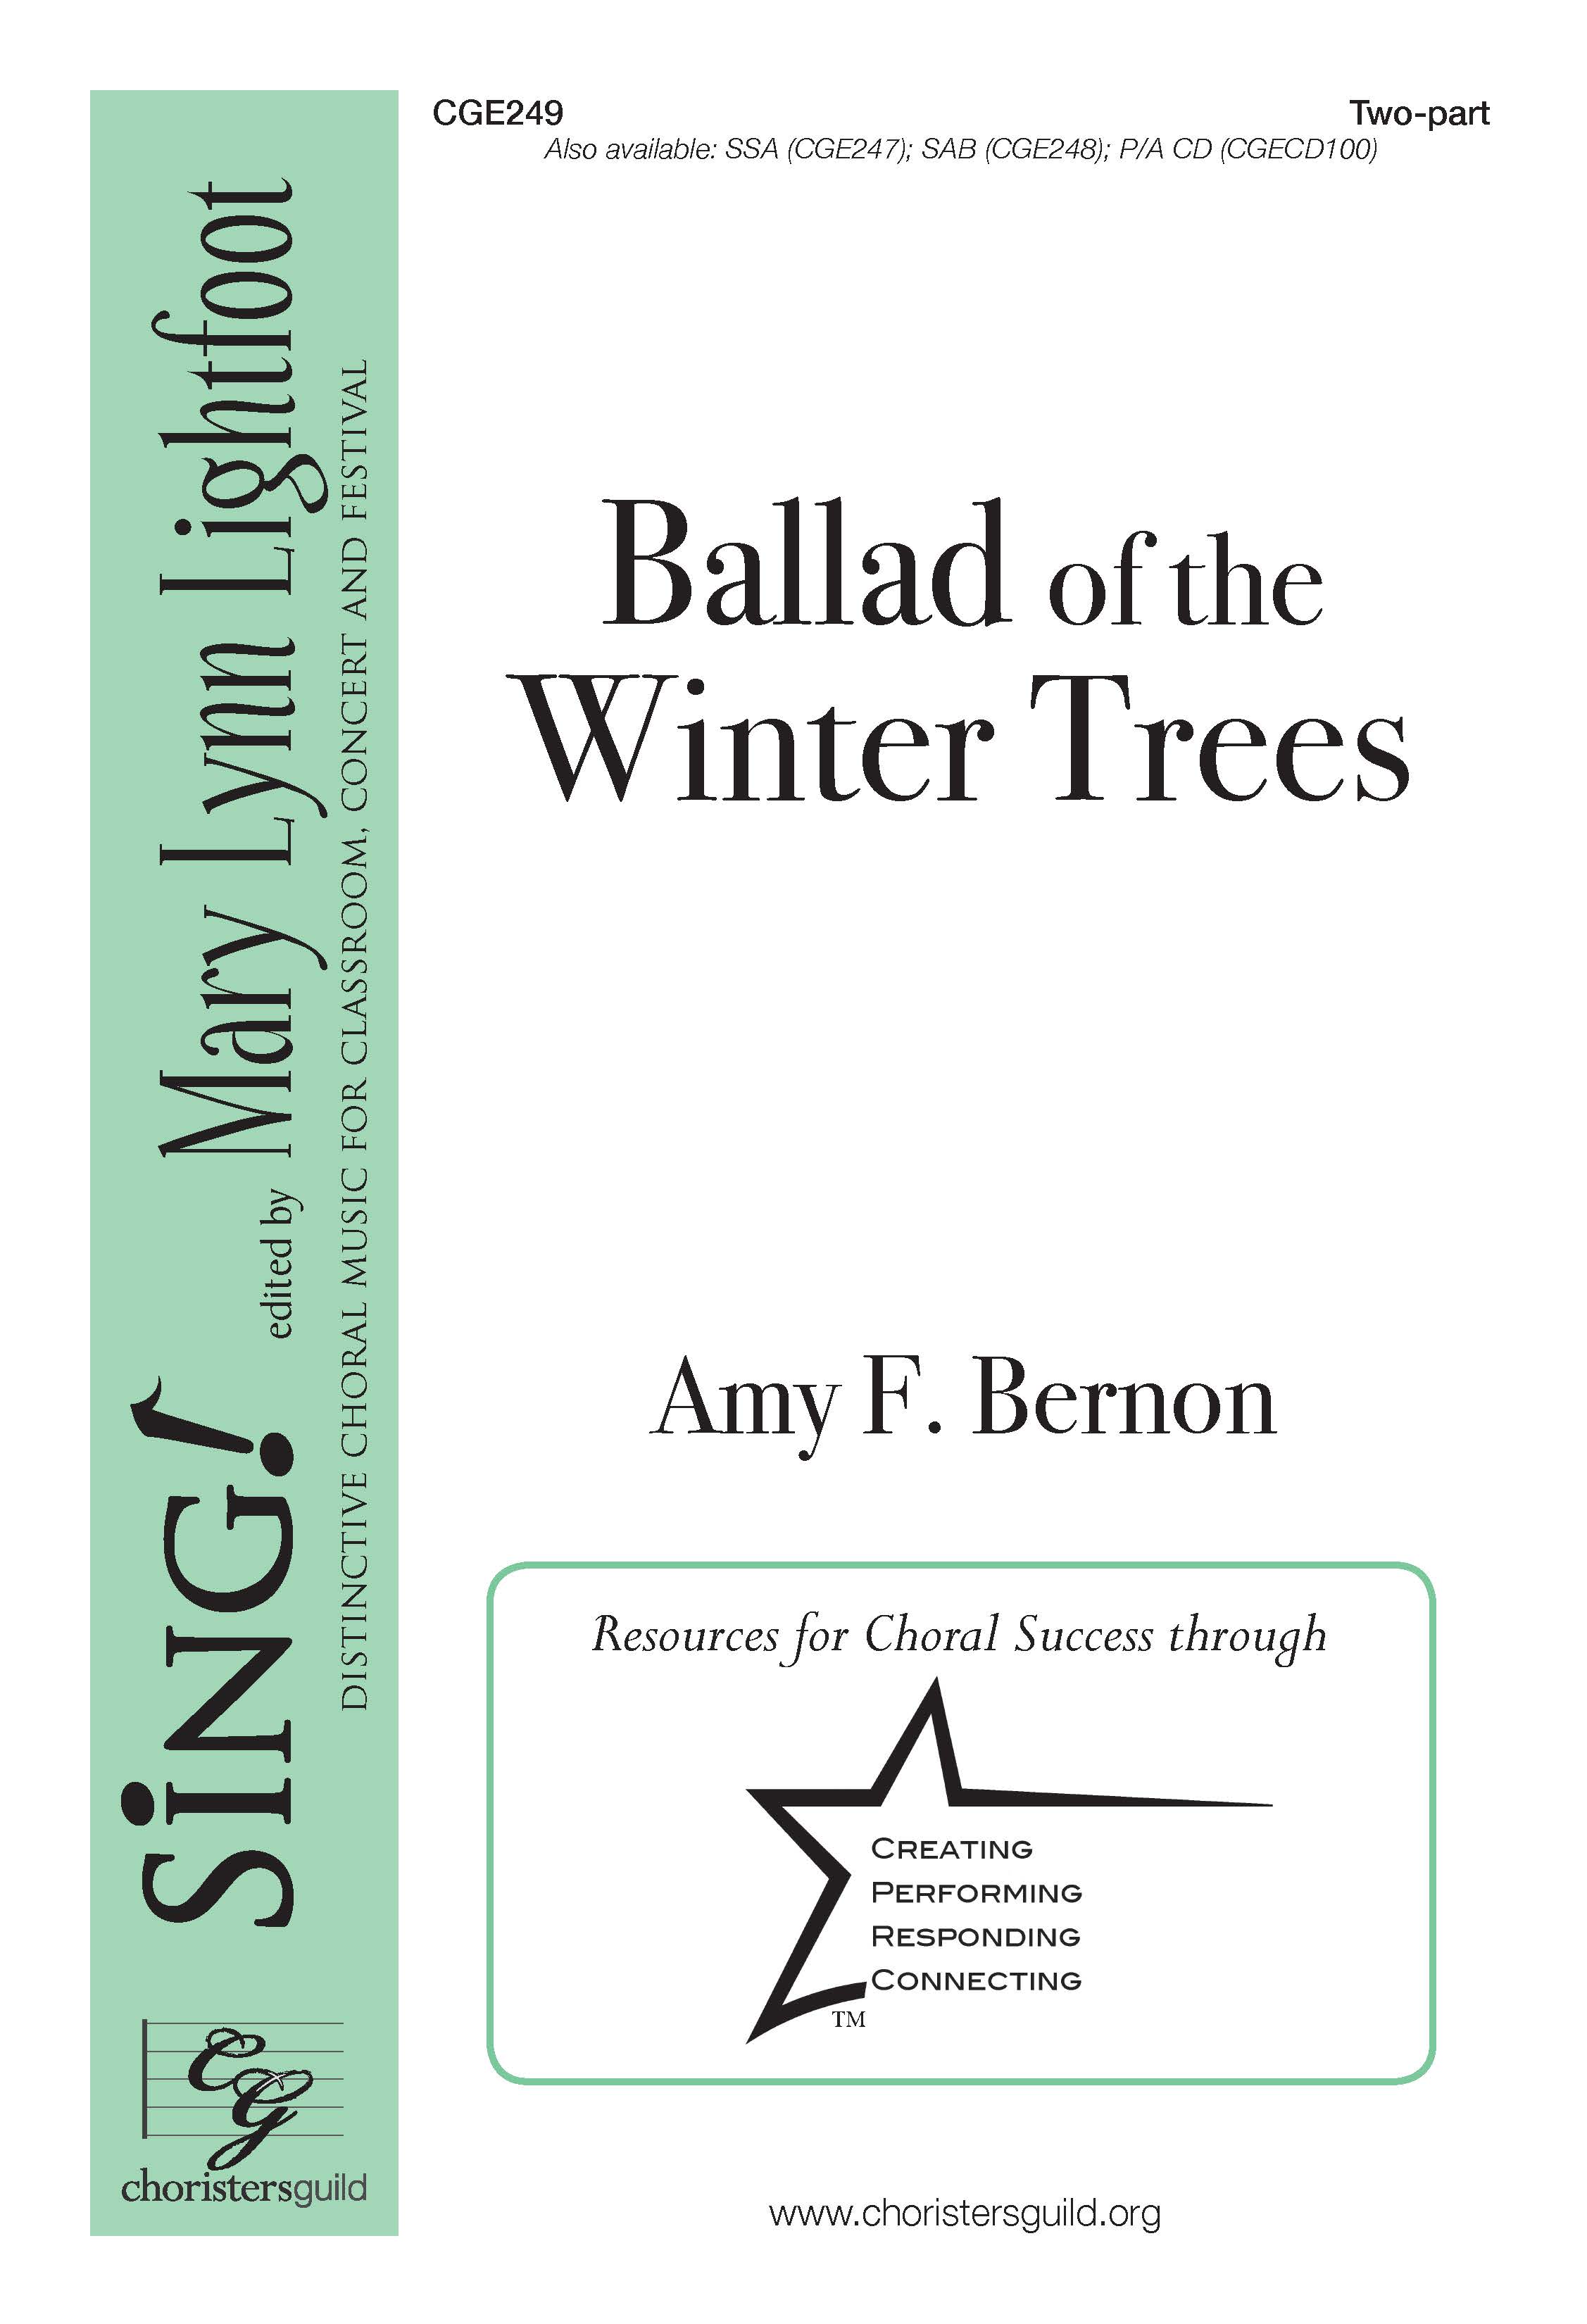 Ballad of the Winter Trees Two-part